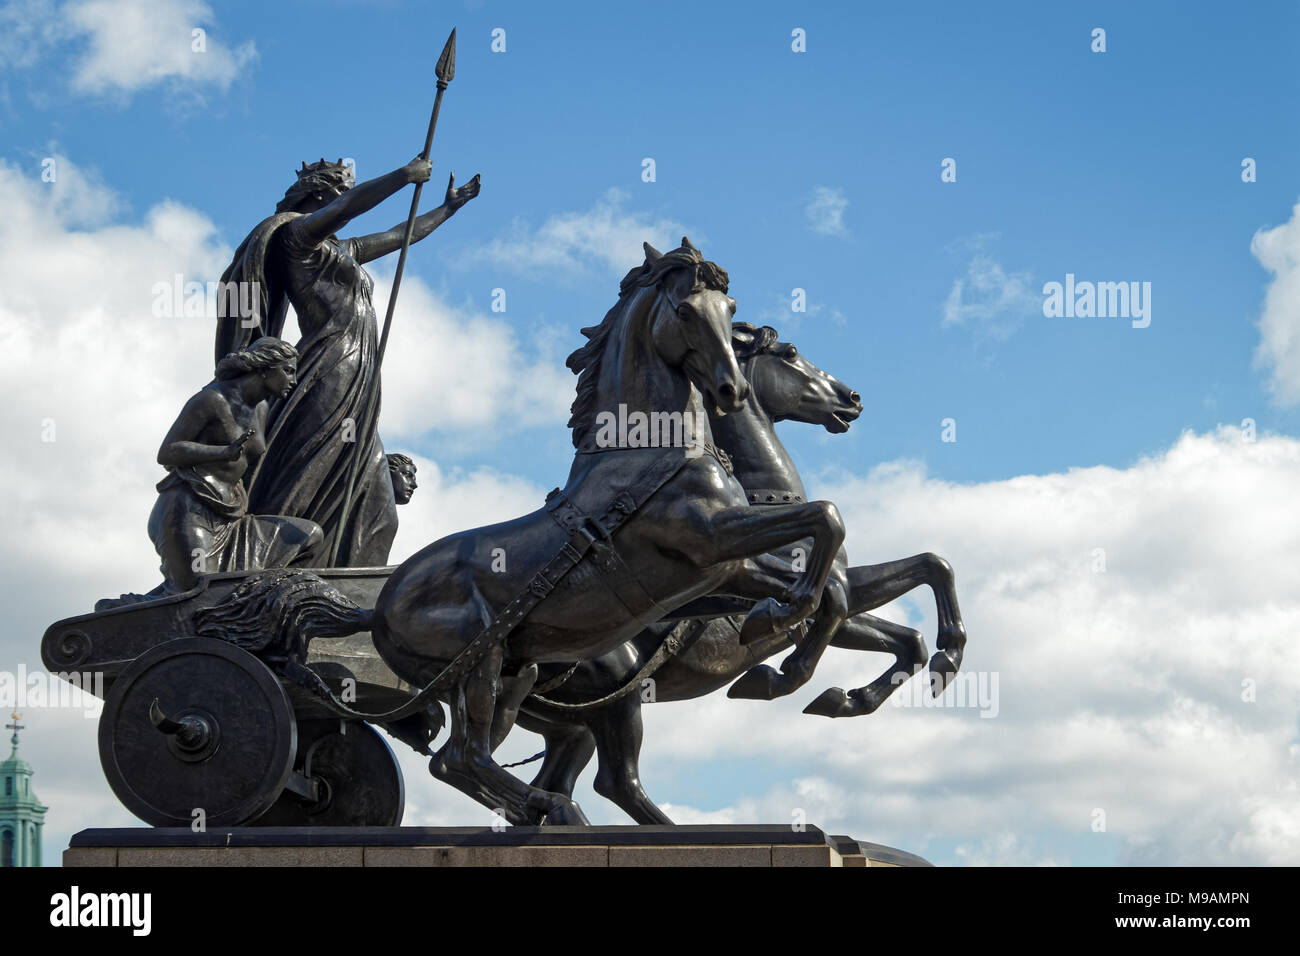 LONDON/UK - MARCH 21 : Monument to Boudicca in London on March 21, 2018 Stock Photo